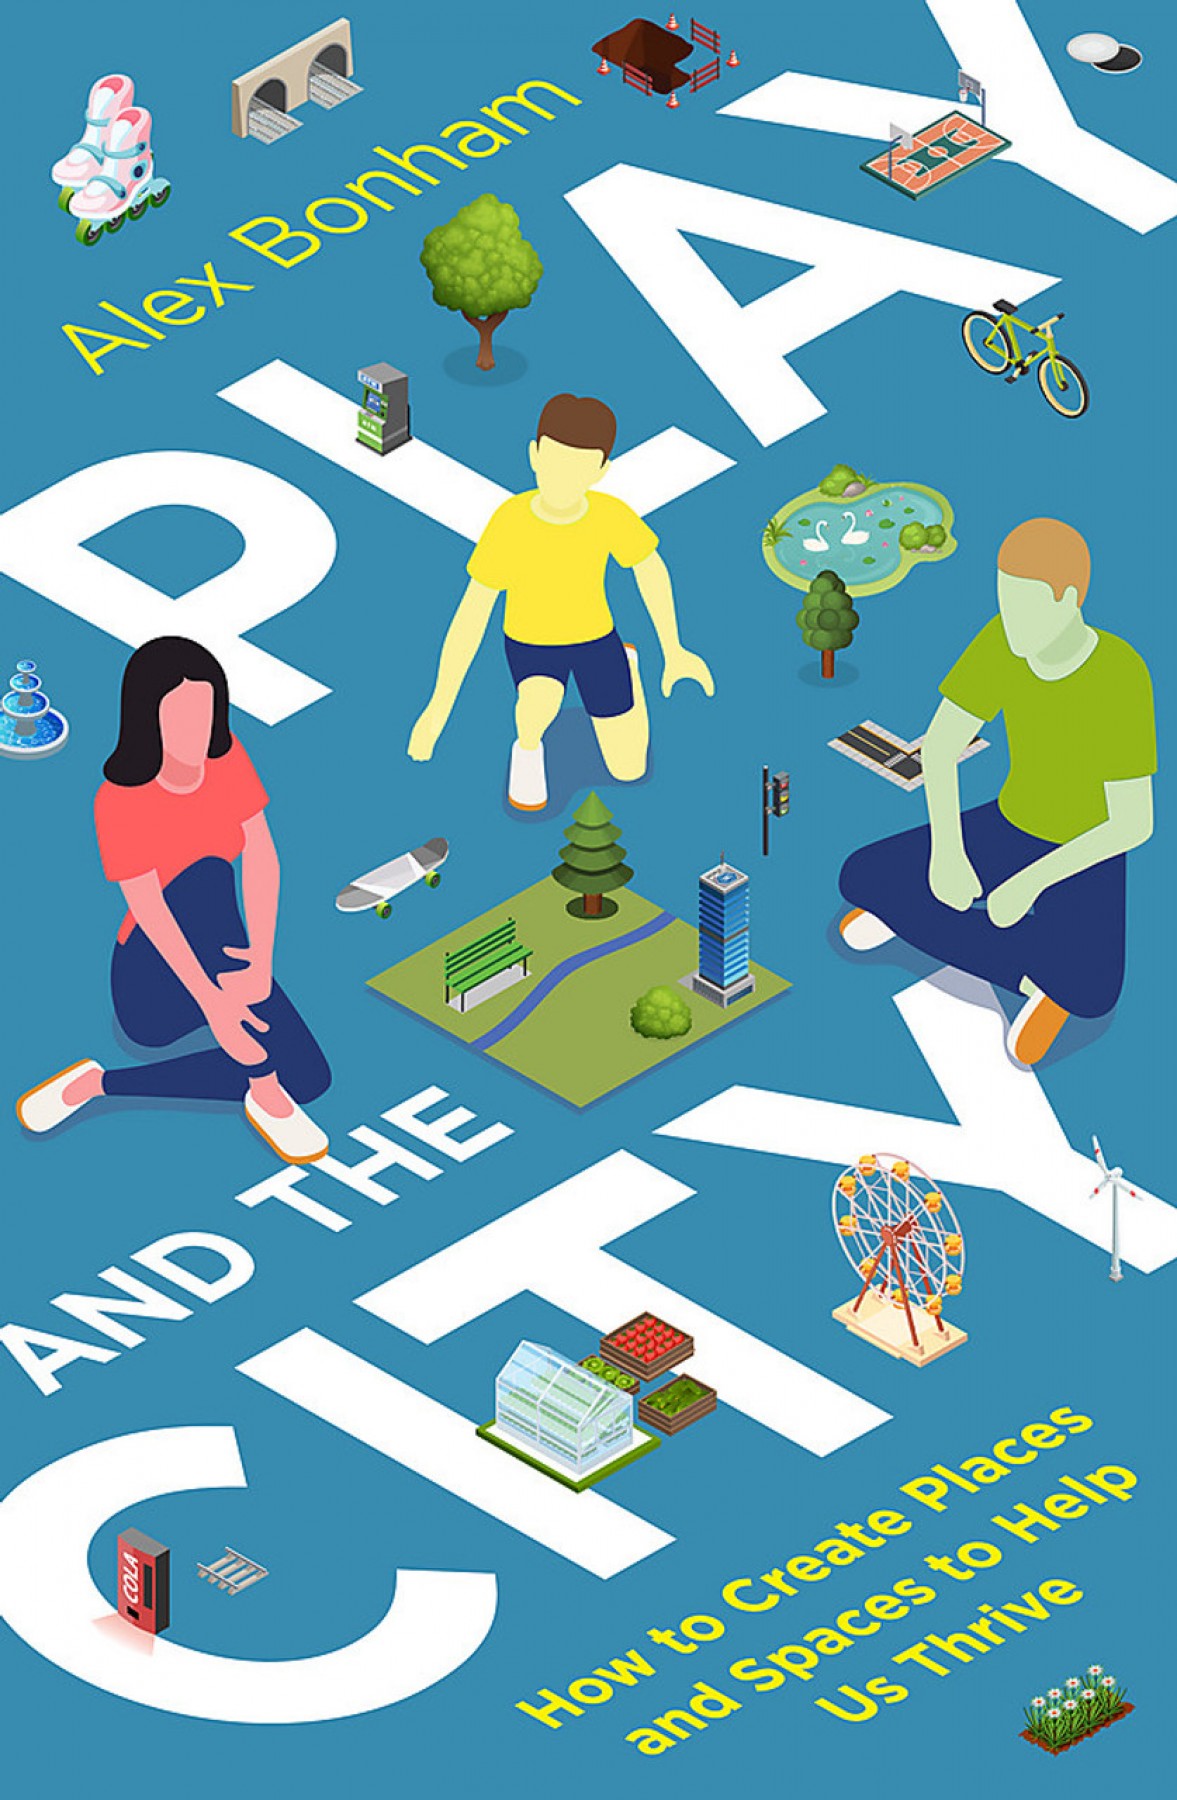 Play and the city: How to create places and spaces to help us thrive